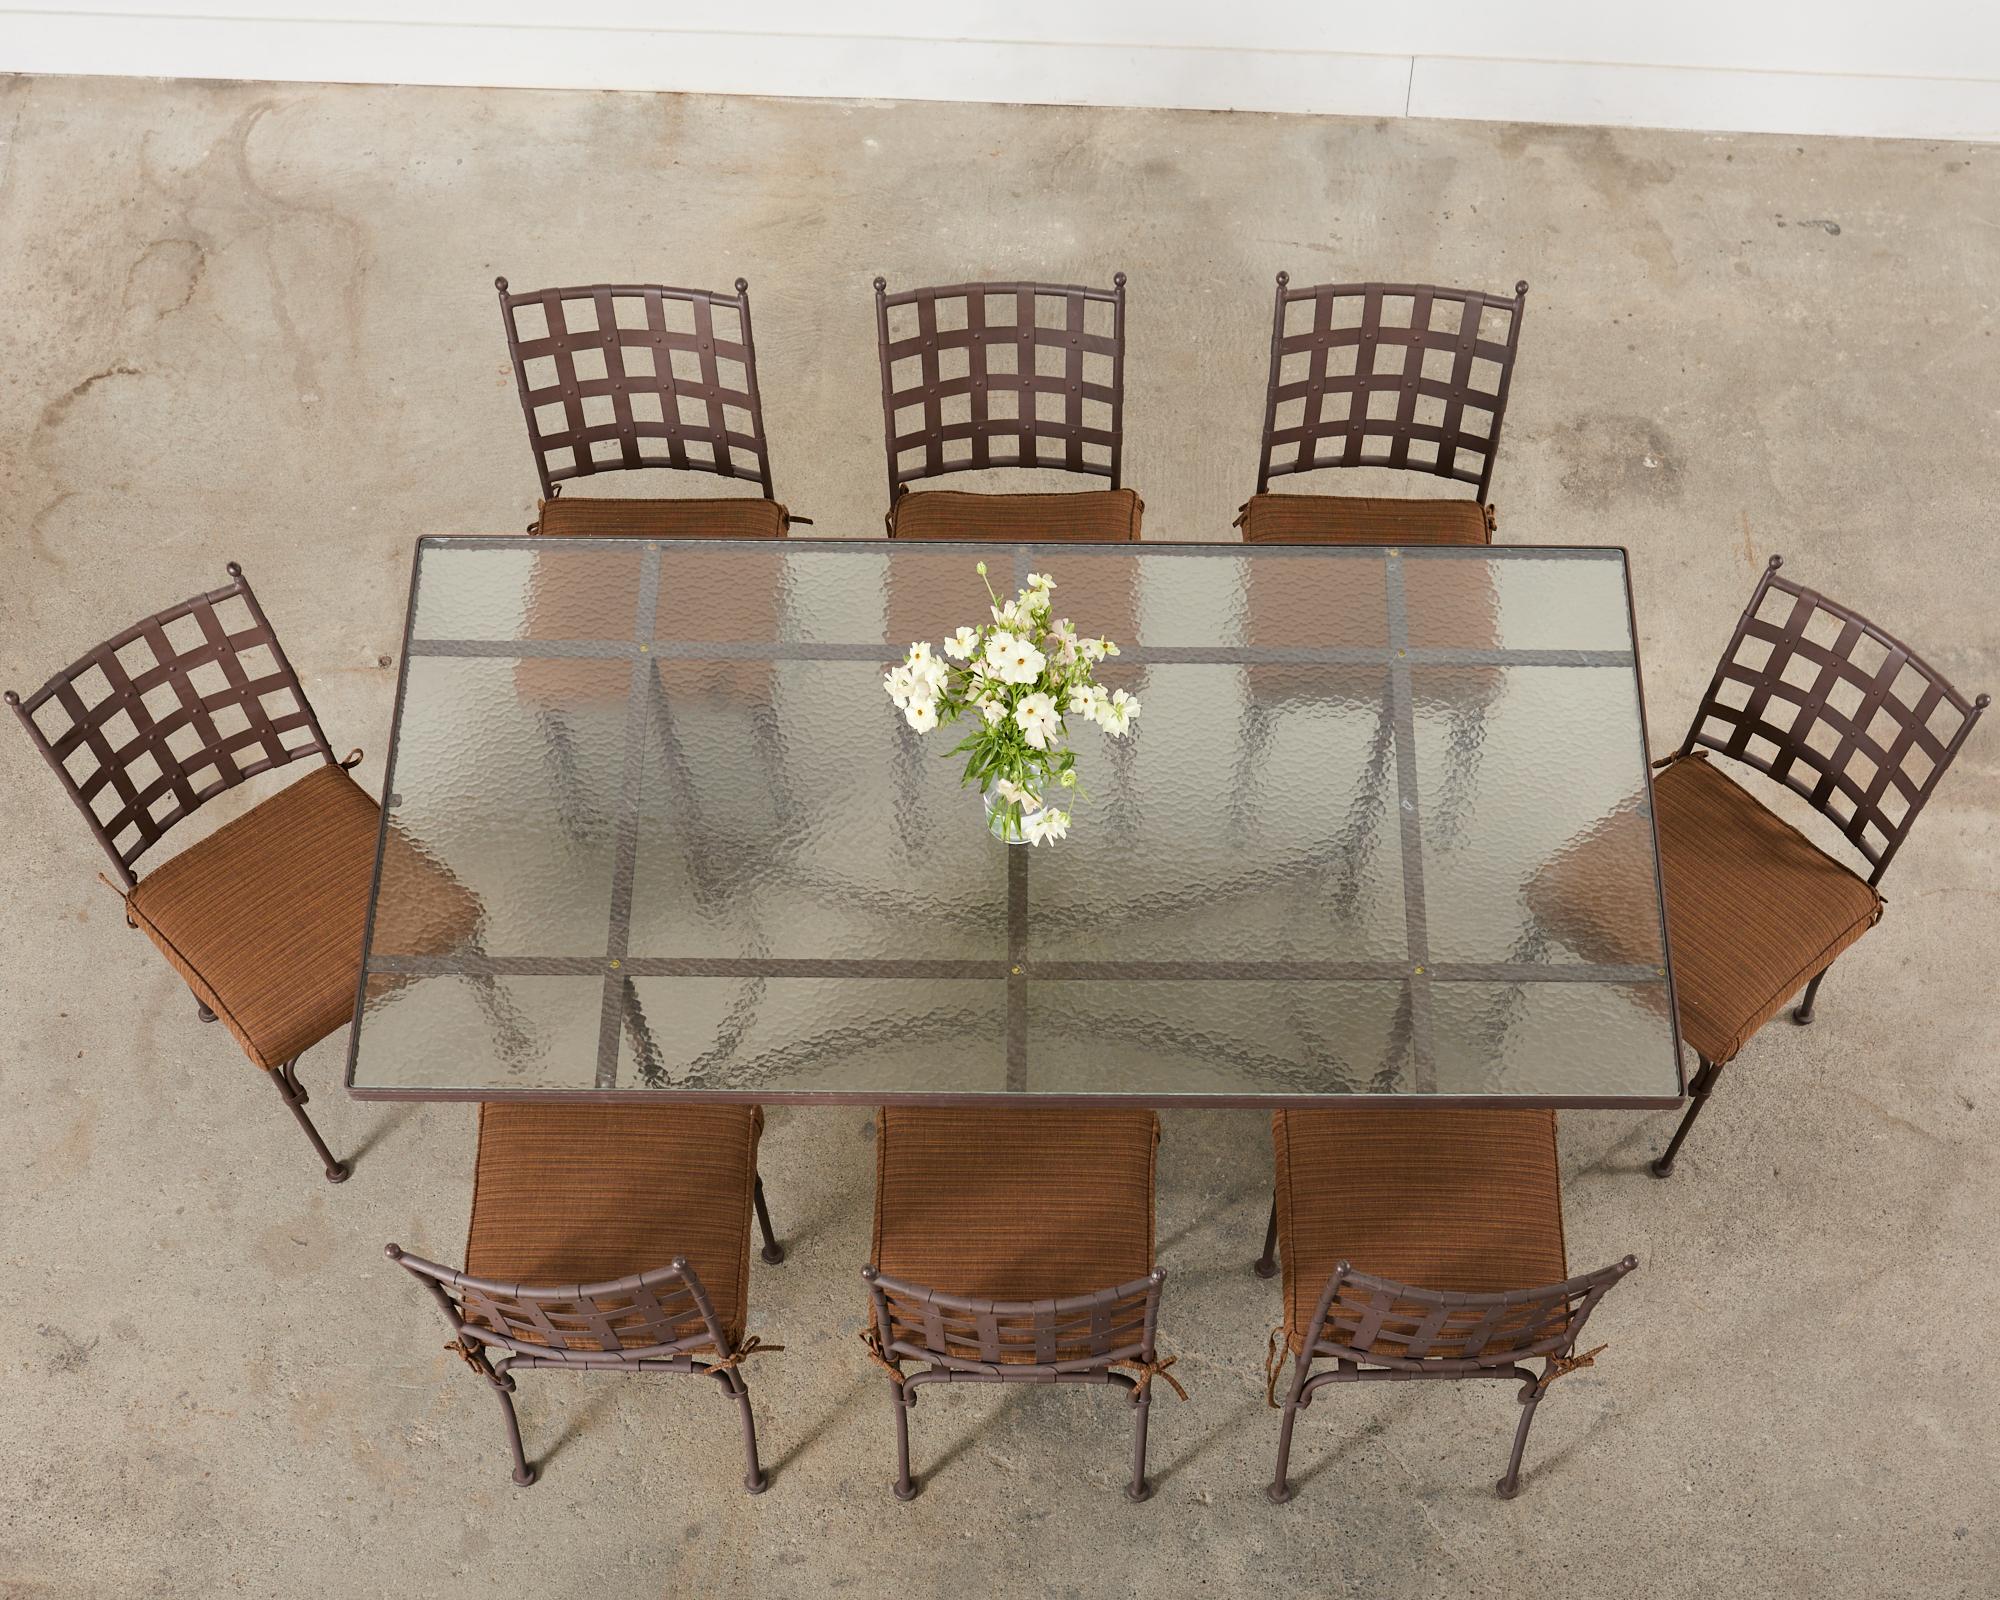 Distinctive patio and garden outdoor dining suite consisting of eight dining chairs and one large rectangular dining table. Beautifully crafted in the manner and style of Mario Papperzini for John Salterini from wrought iron and galvanized steel.